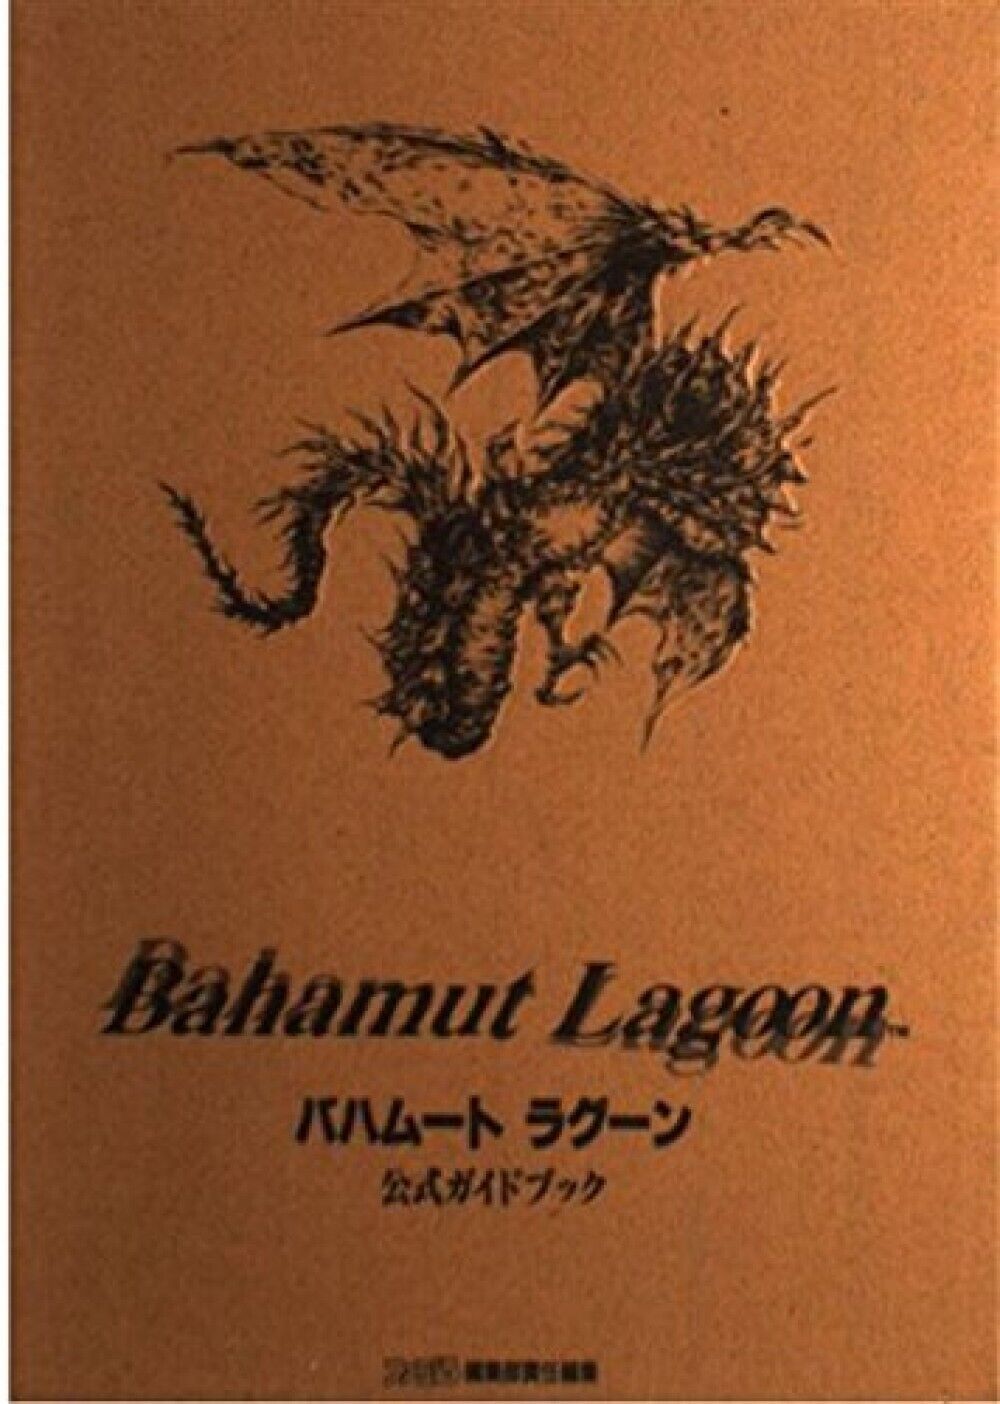 Bahamut Lagoon Official Guide Book Strategy Guide Nintendo JAPAN Super Famicom